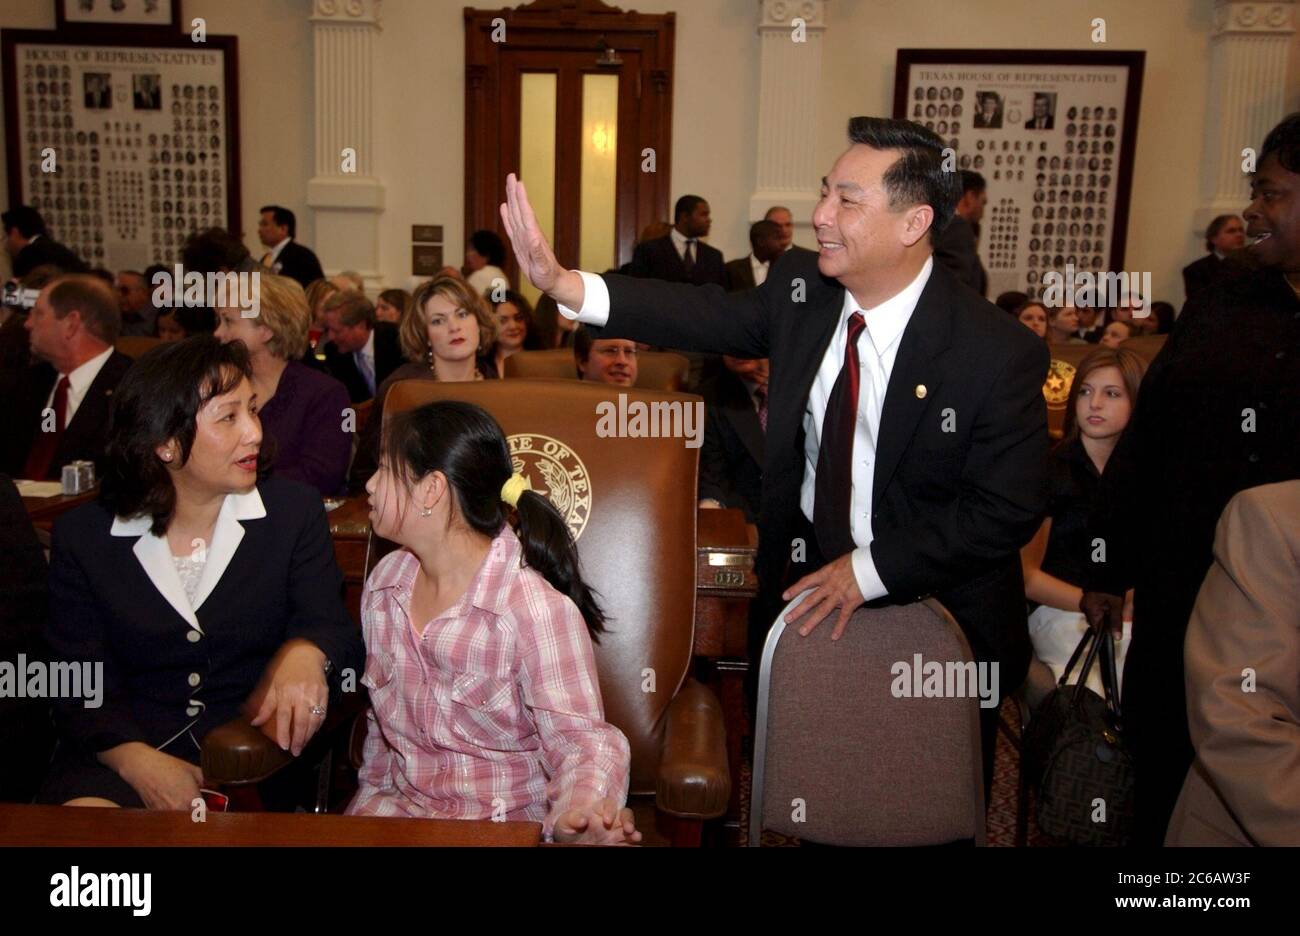 Hubert Vo, the first Vietnamese-American elected to the Texas legislature, with his wife and daughter on opening day of his first legislative session at the Texas Capitol in January 2005. Stock Photo